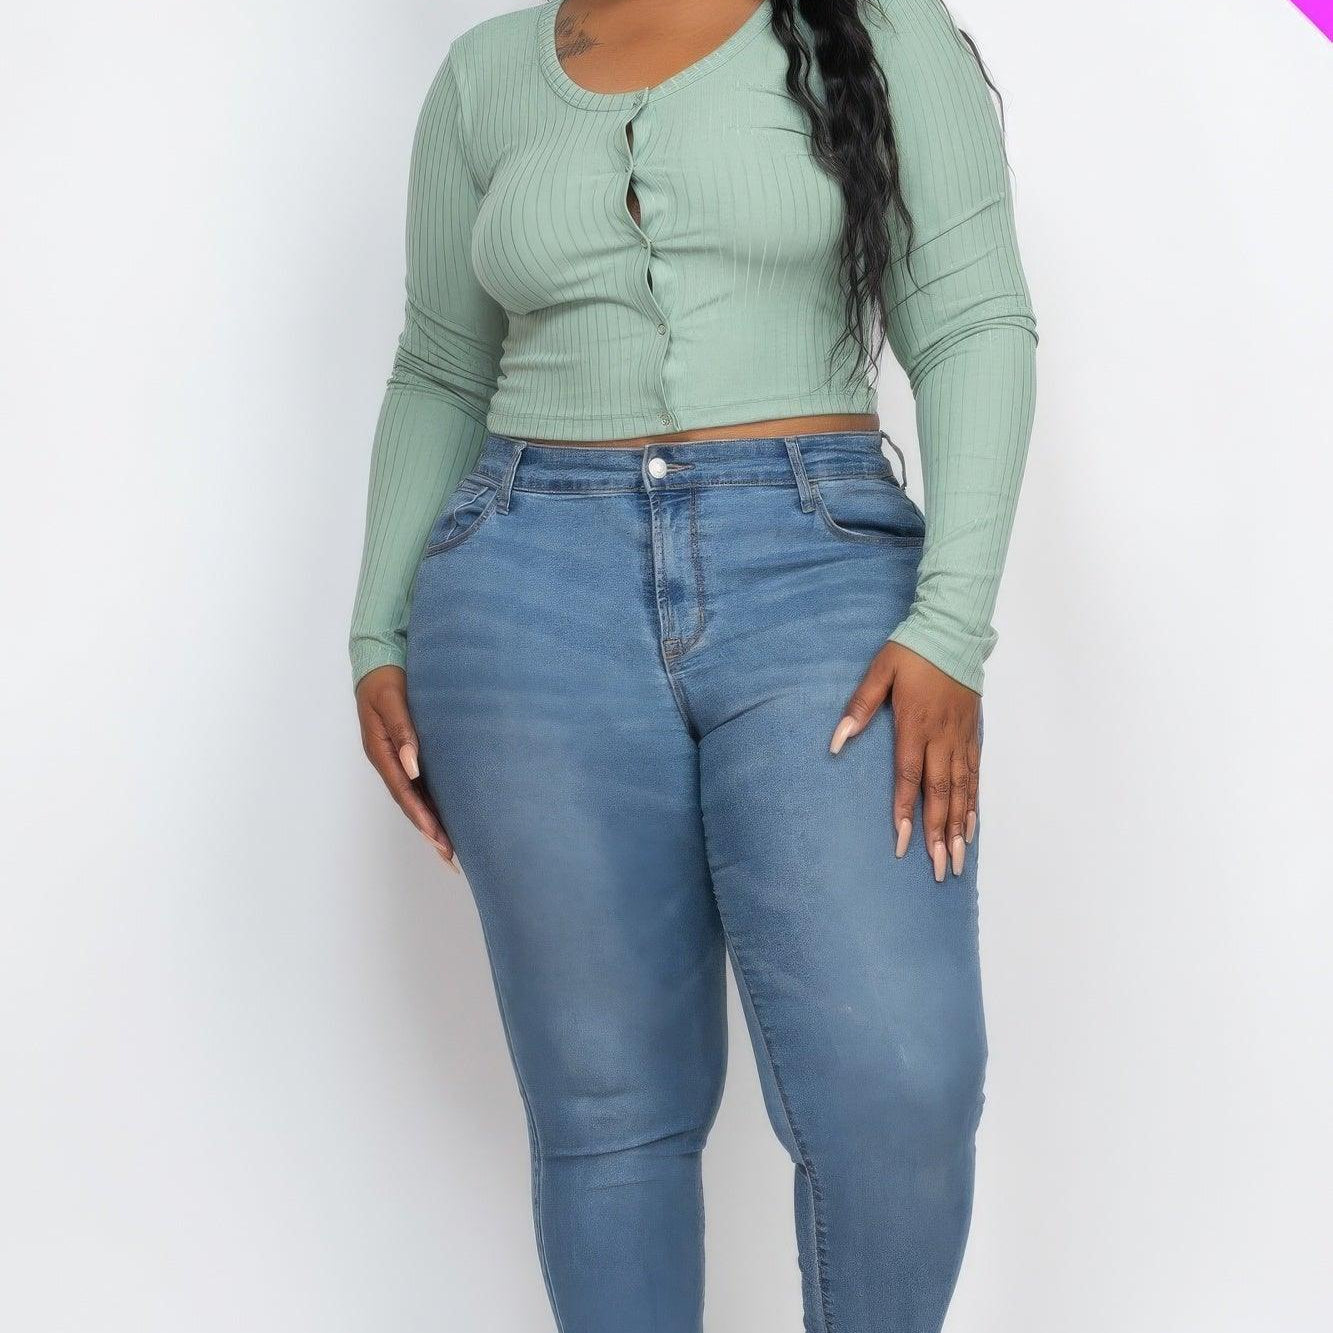 Women's Shirts - Cropped Tops Plus Size Button Up Cropped Top